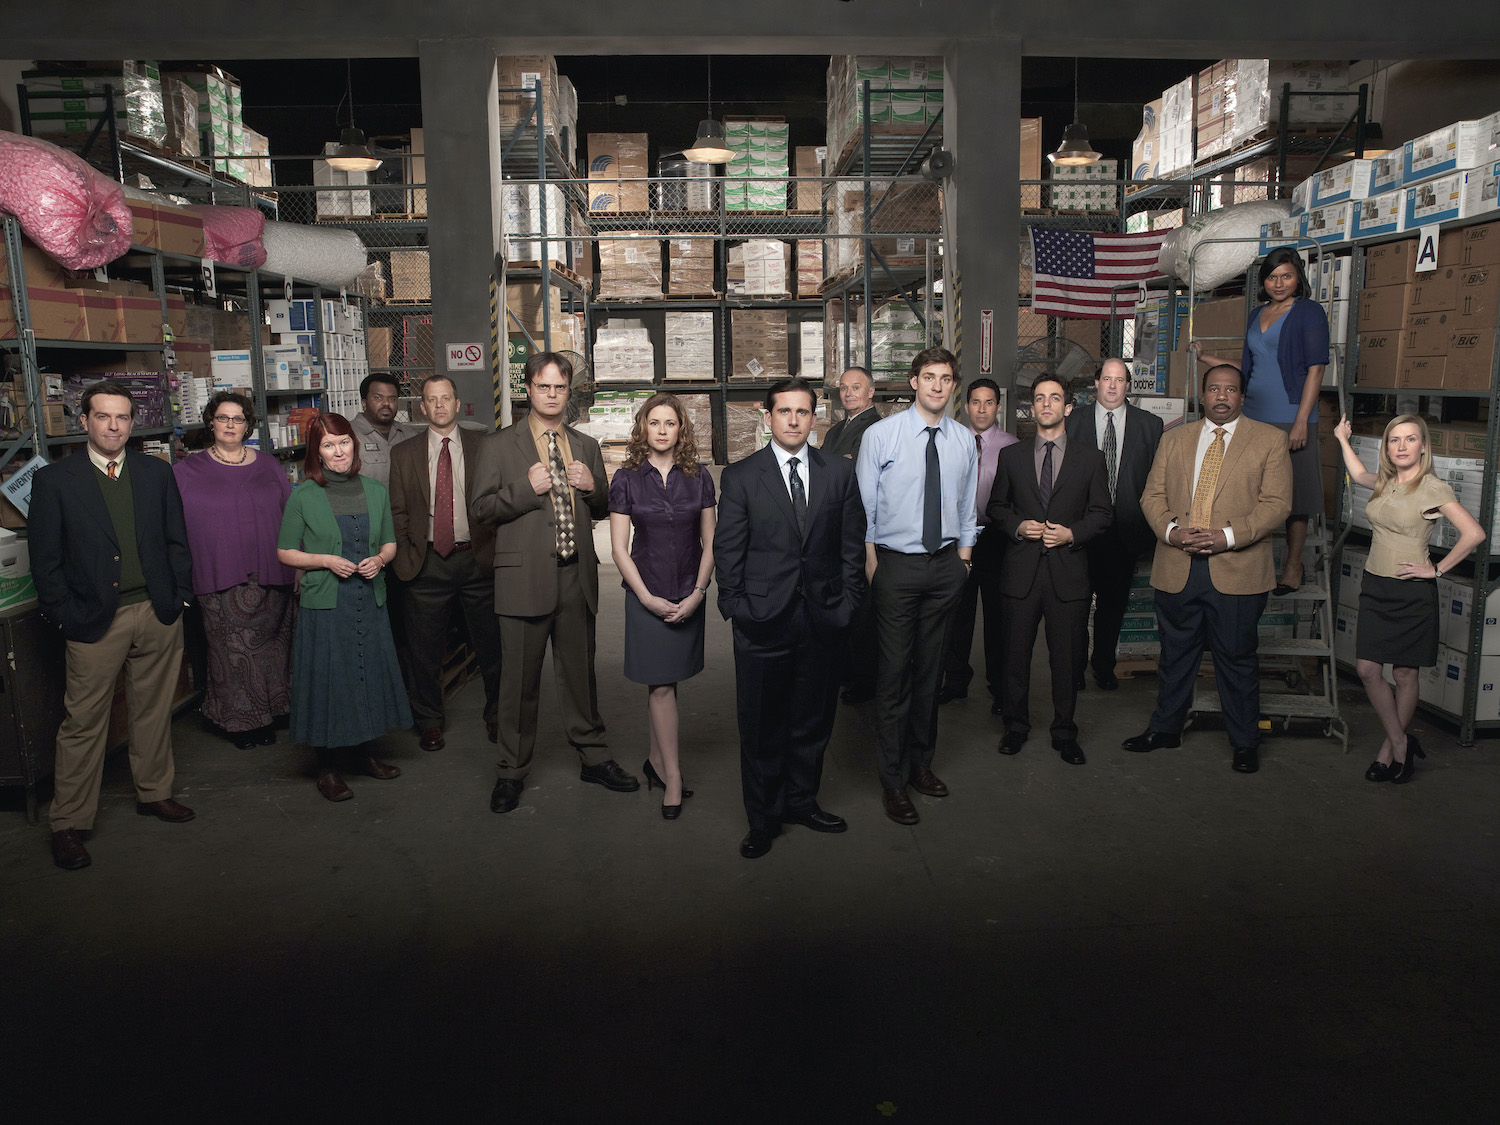 The cast of 'The Office' pose in the warehouse as their characters